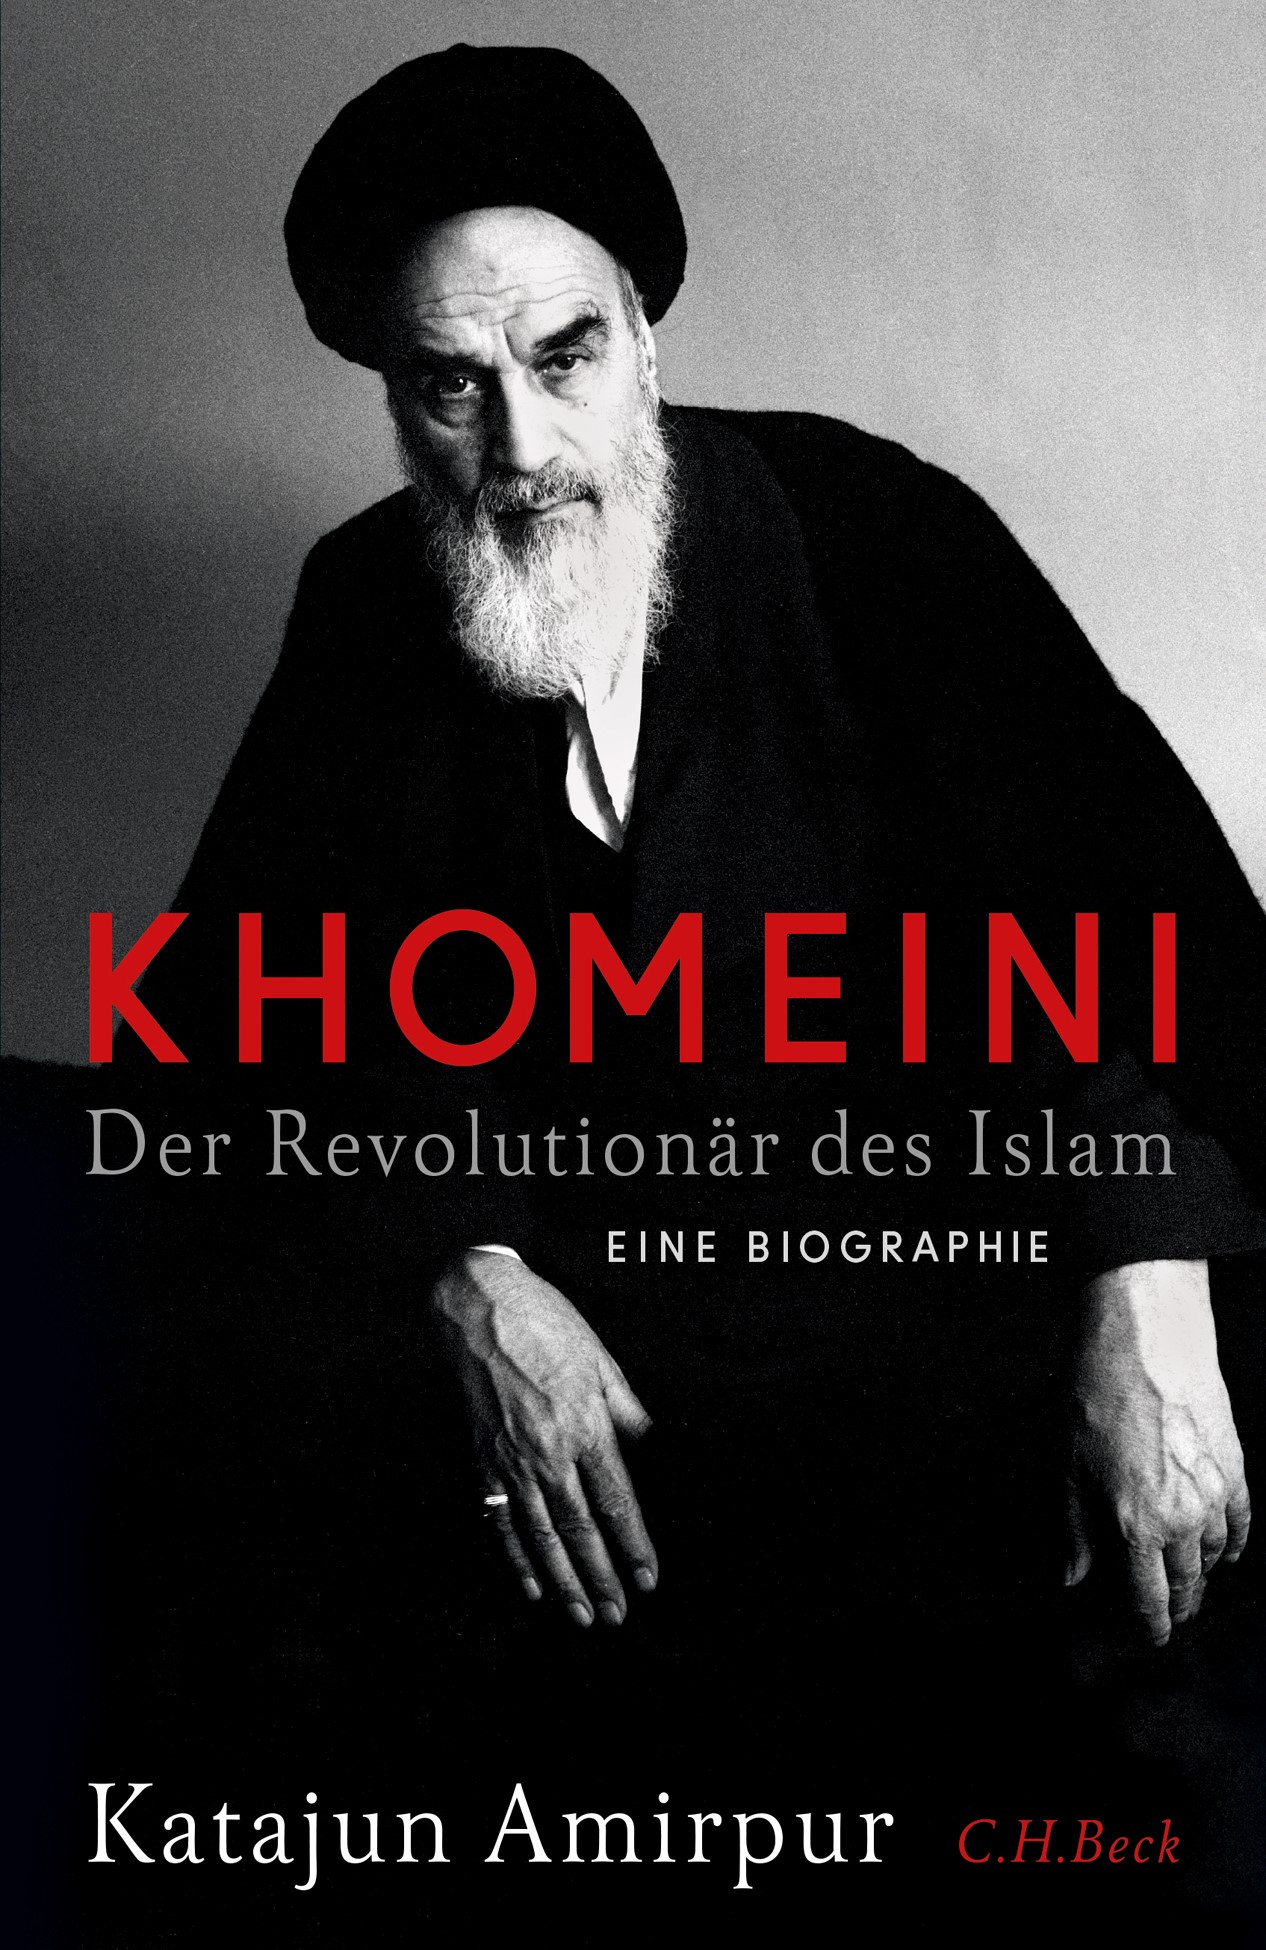 Cover of Katajun Amirpur's "Khomeini. The Revolutionary of Islam. A Biography" (published by C.H. Beck)